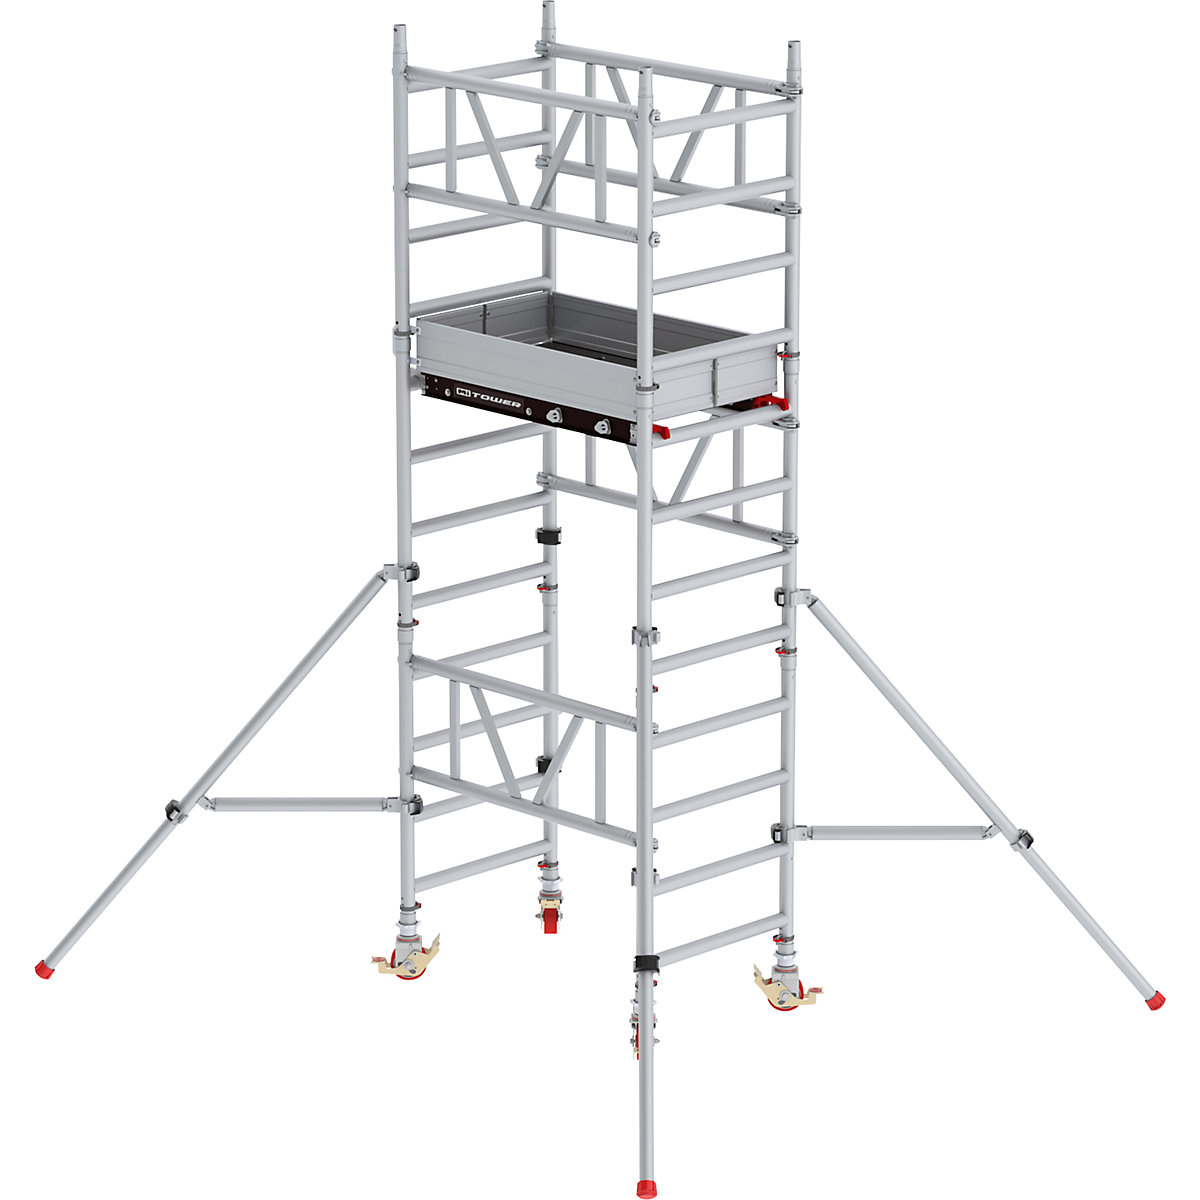 Standard MiTOWER quick assembly mobile access tower – Altrex